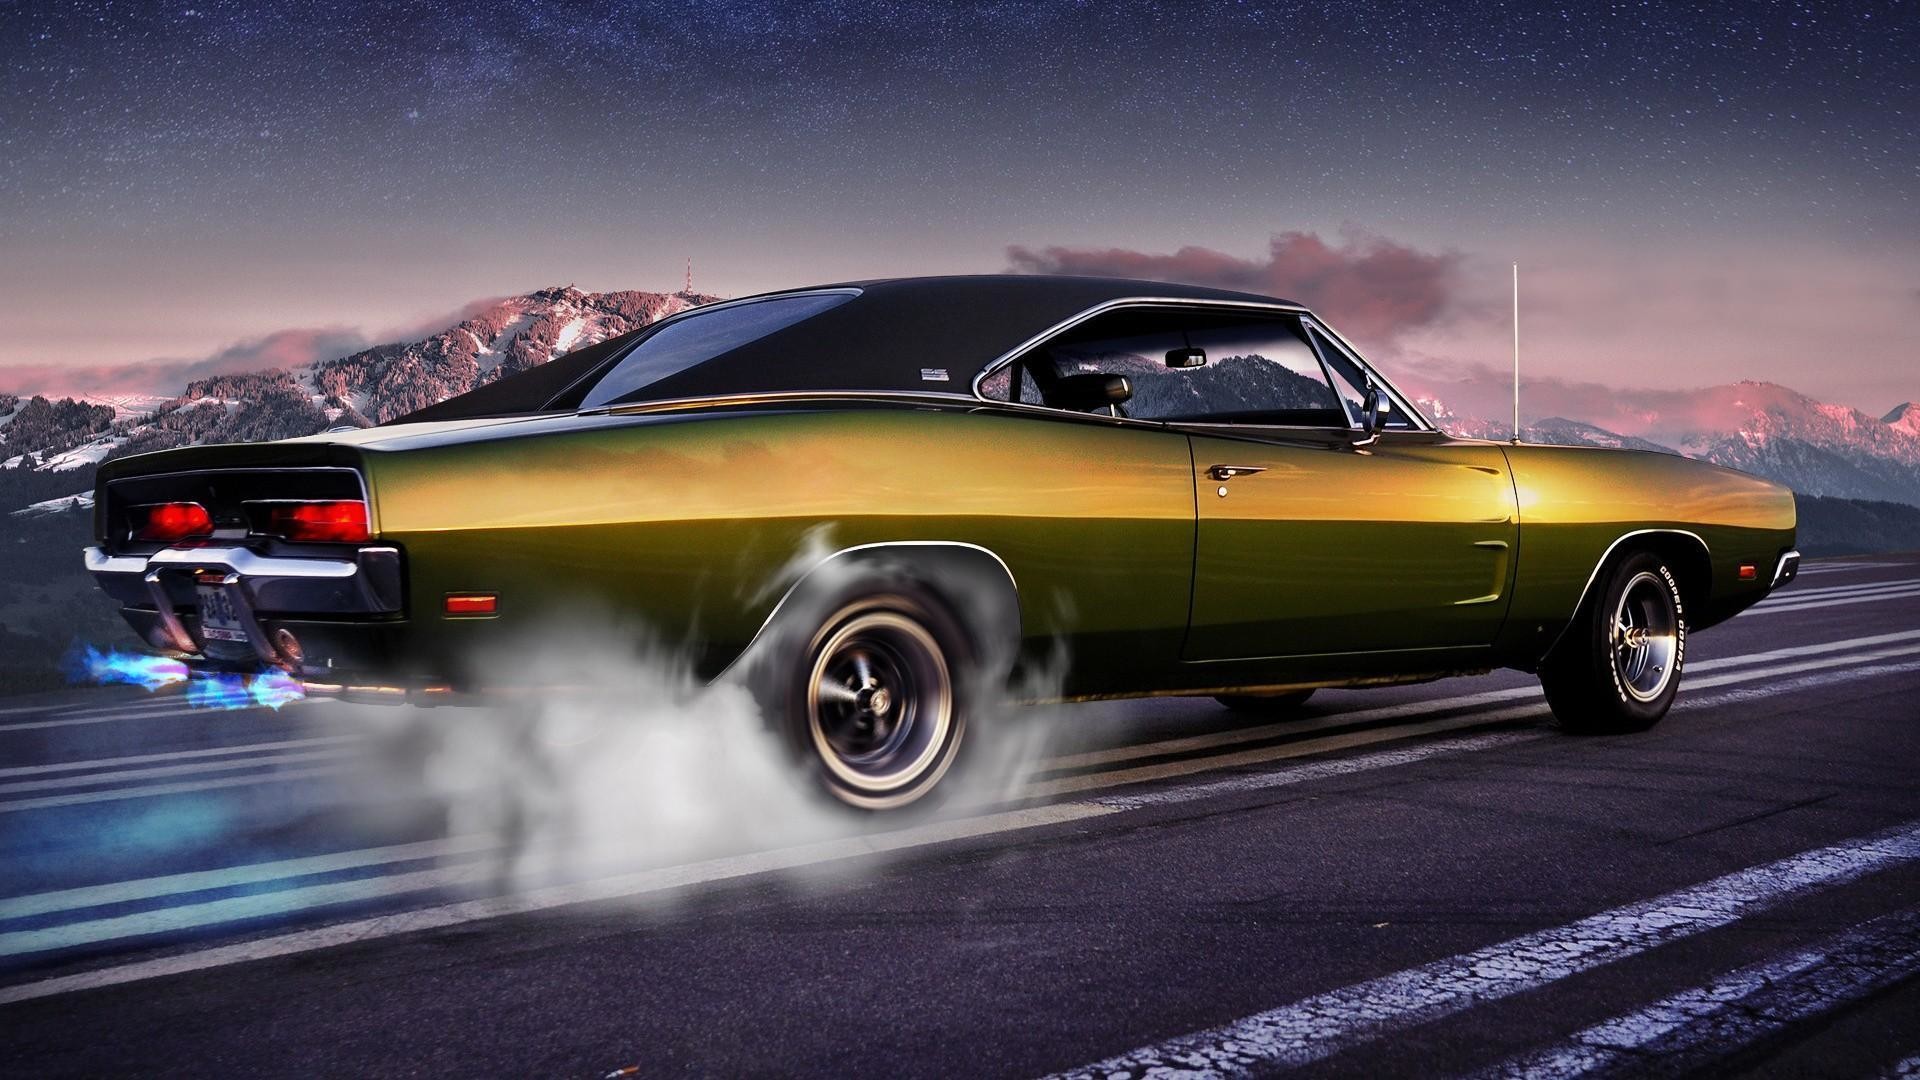 1920x1080 Wallpapers For > Muscle Car Hd Wallpapers For Desktop